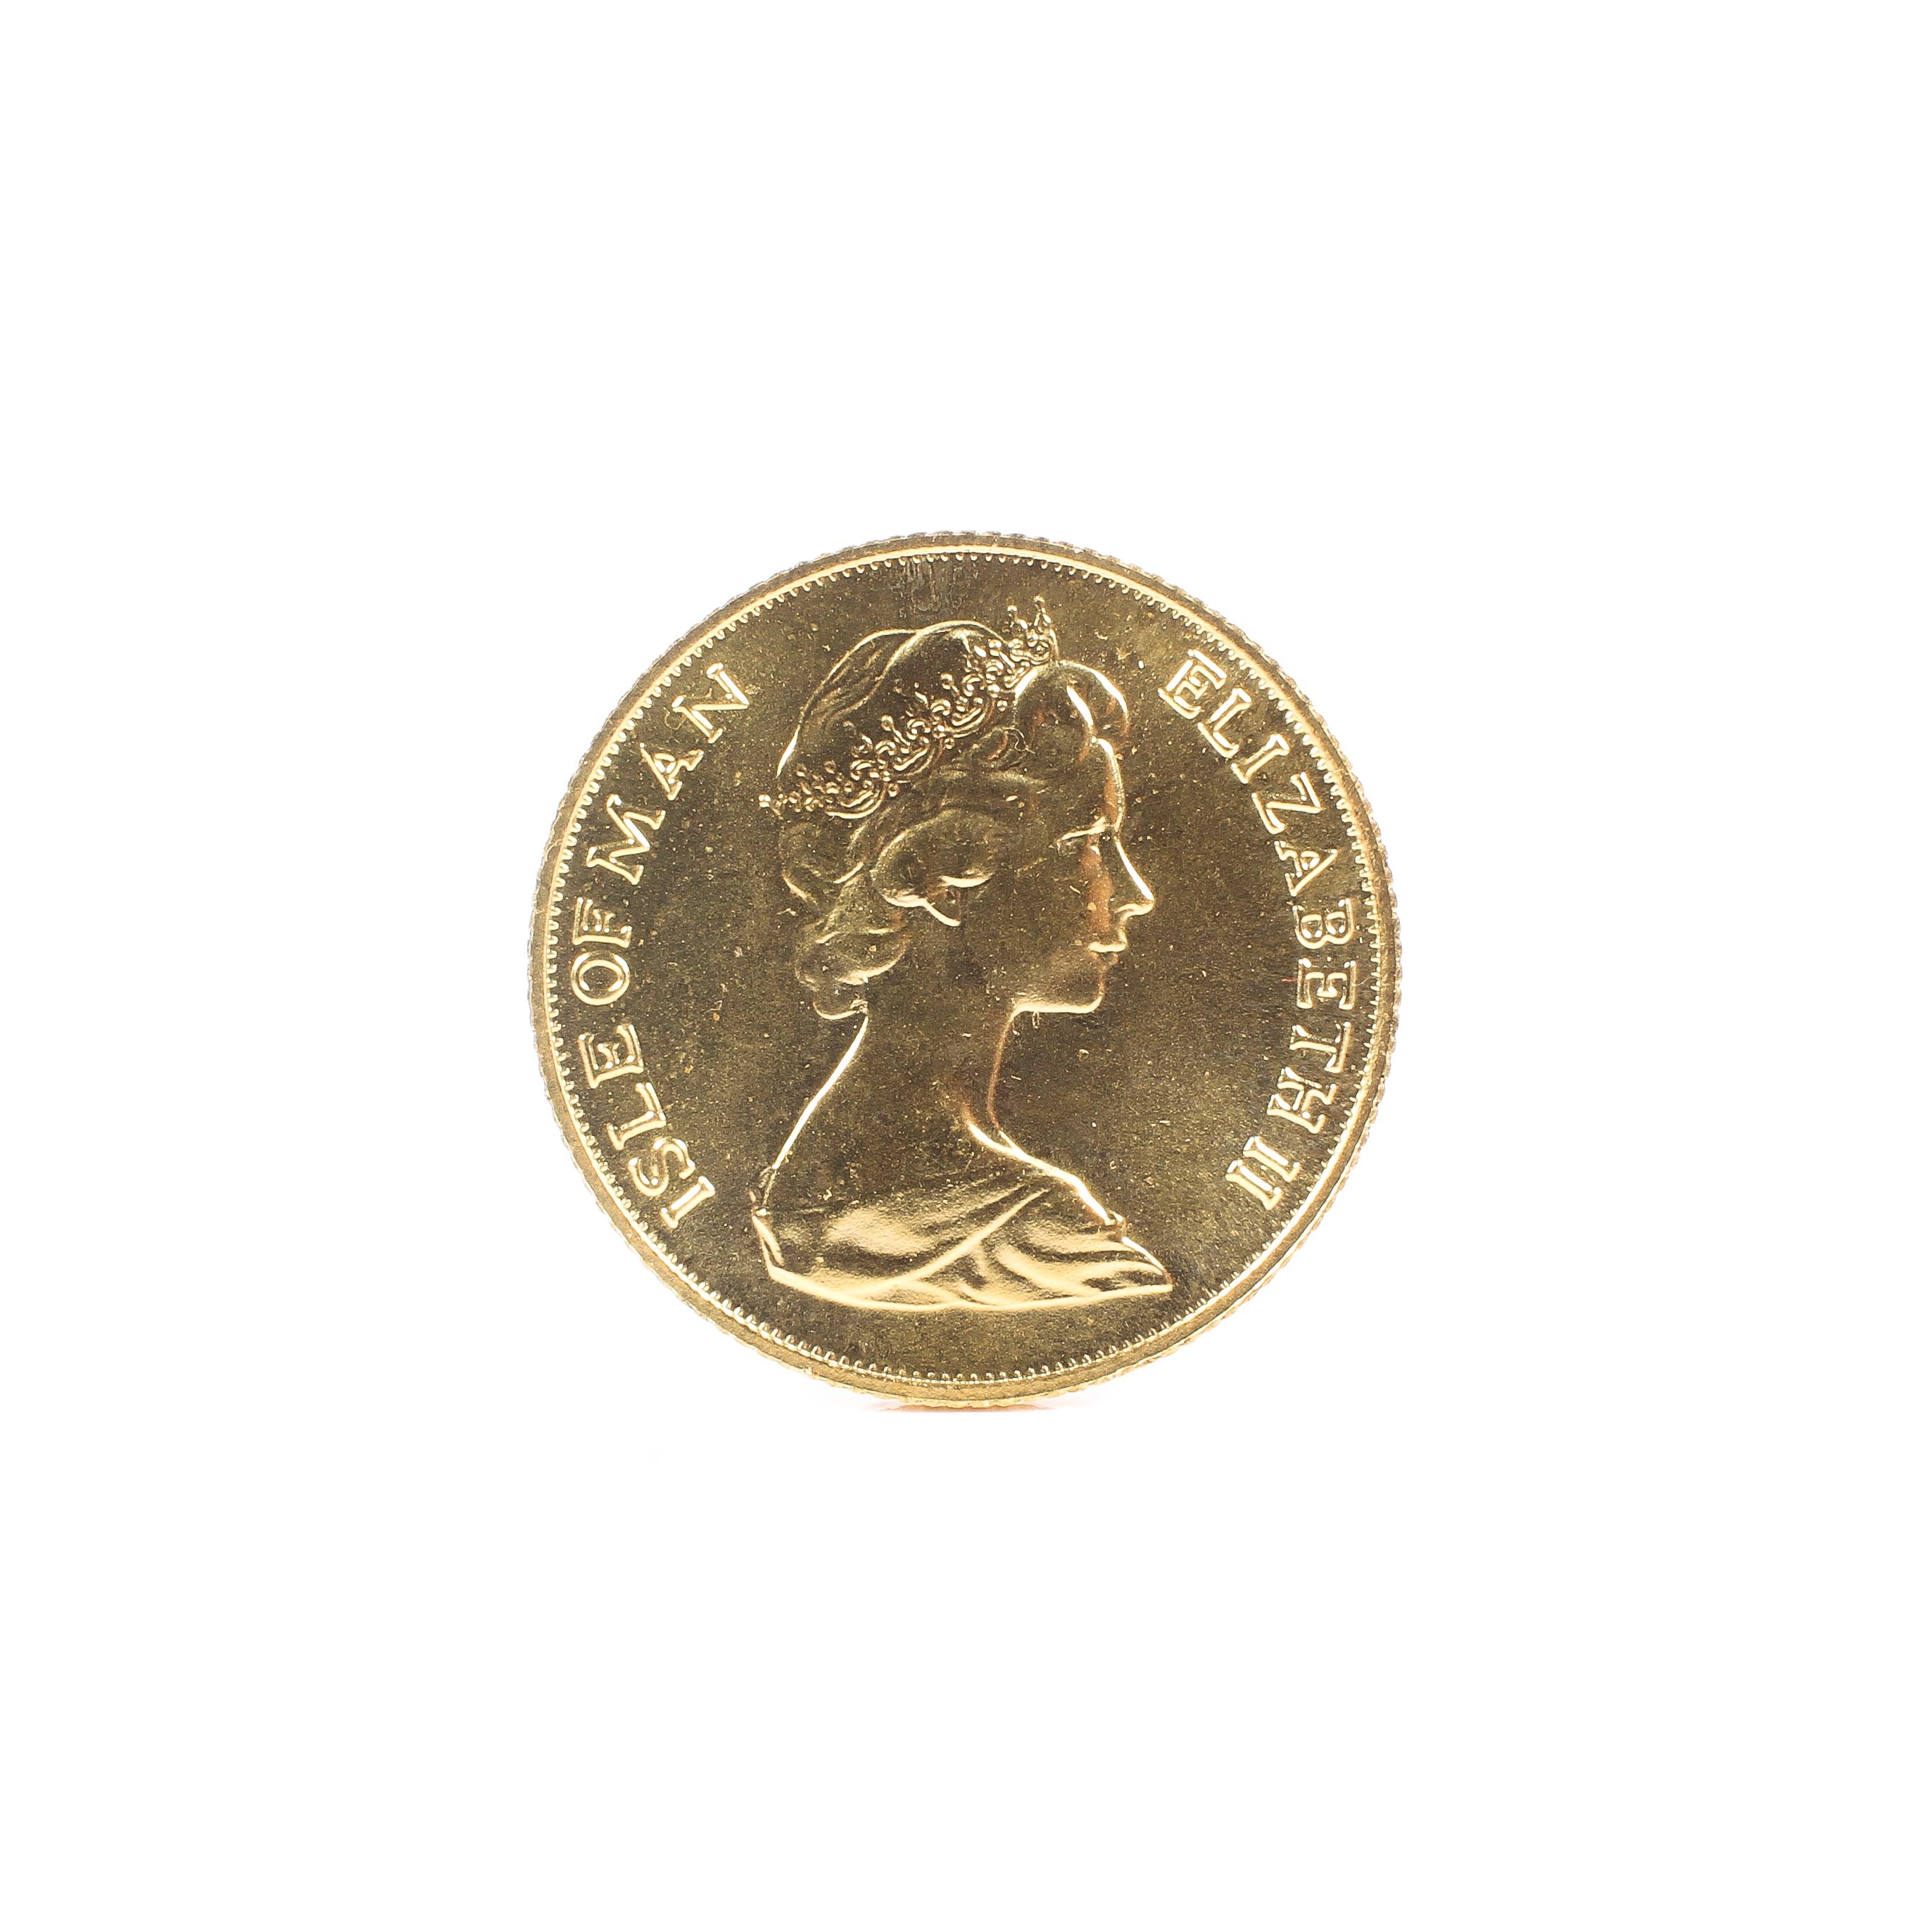 An Isle of Man 1973 Gold sovereign 8.0g.